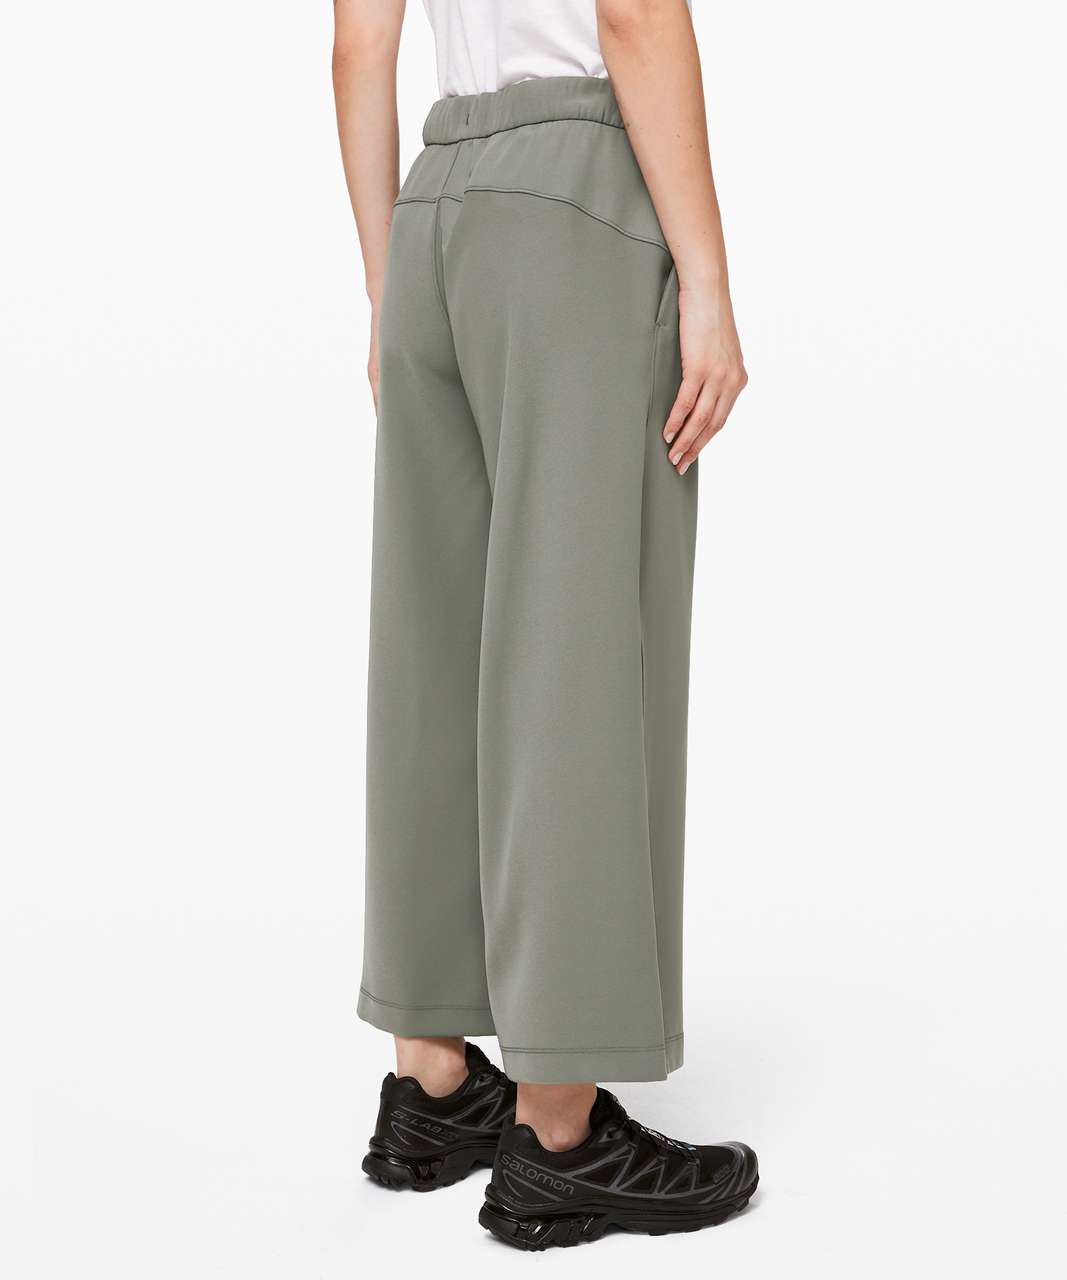 lululemon athletica, Pants & Jumpsuits, New On The Fly Wide Leg Pant